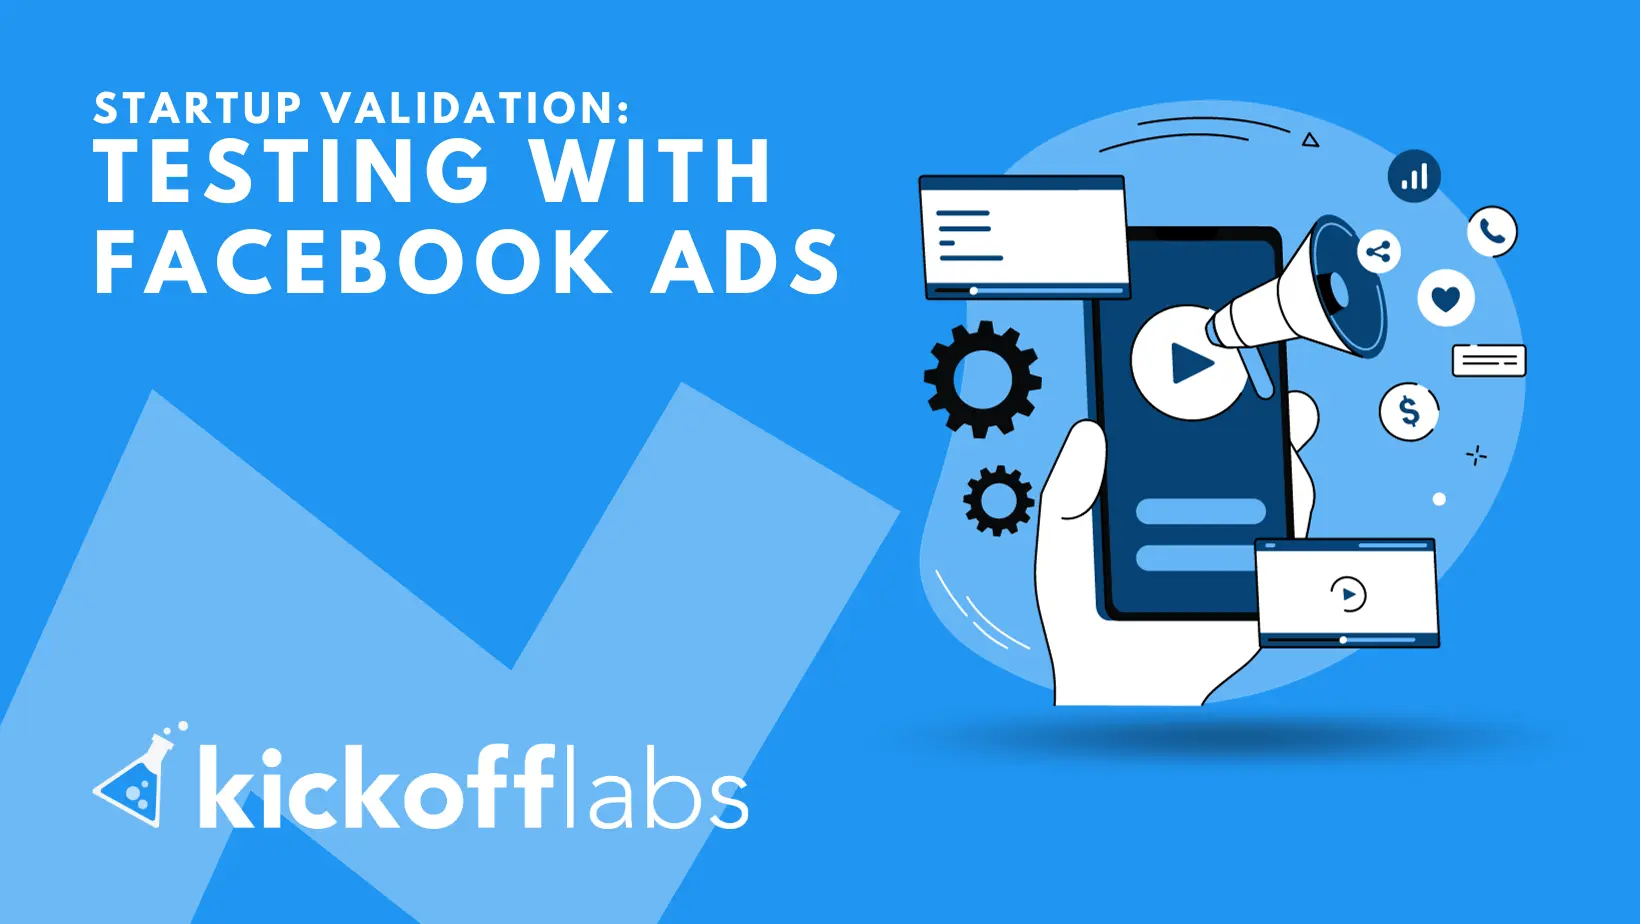 Using Facebook Ads to Validate Your Startup